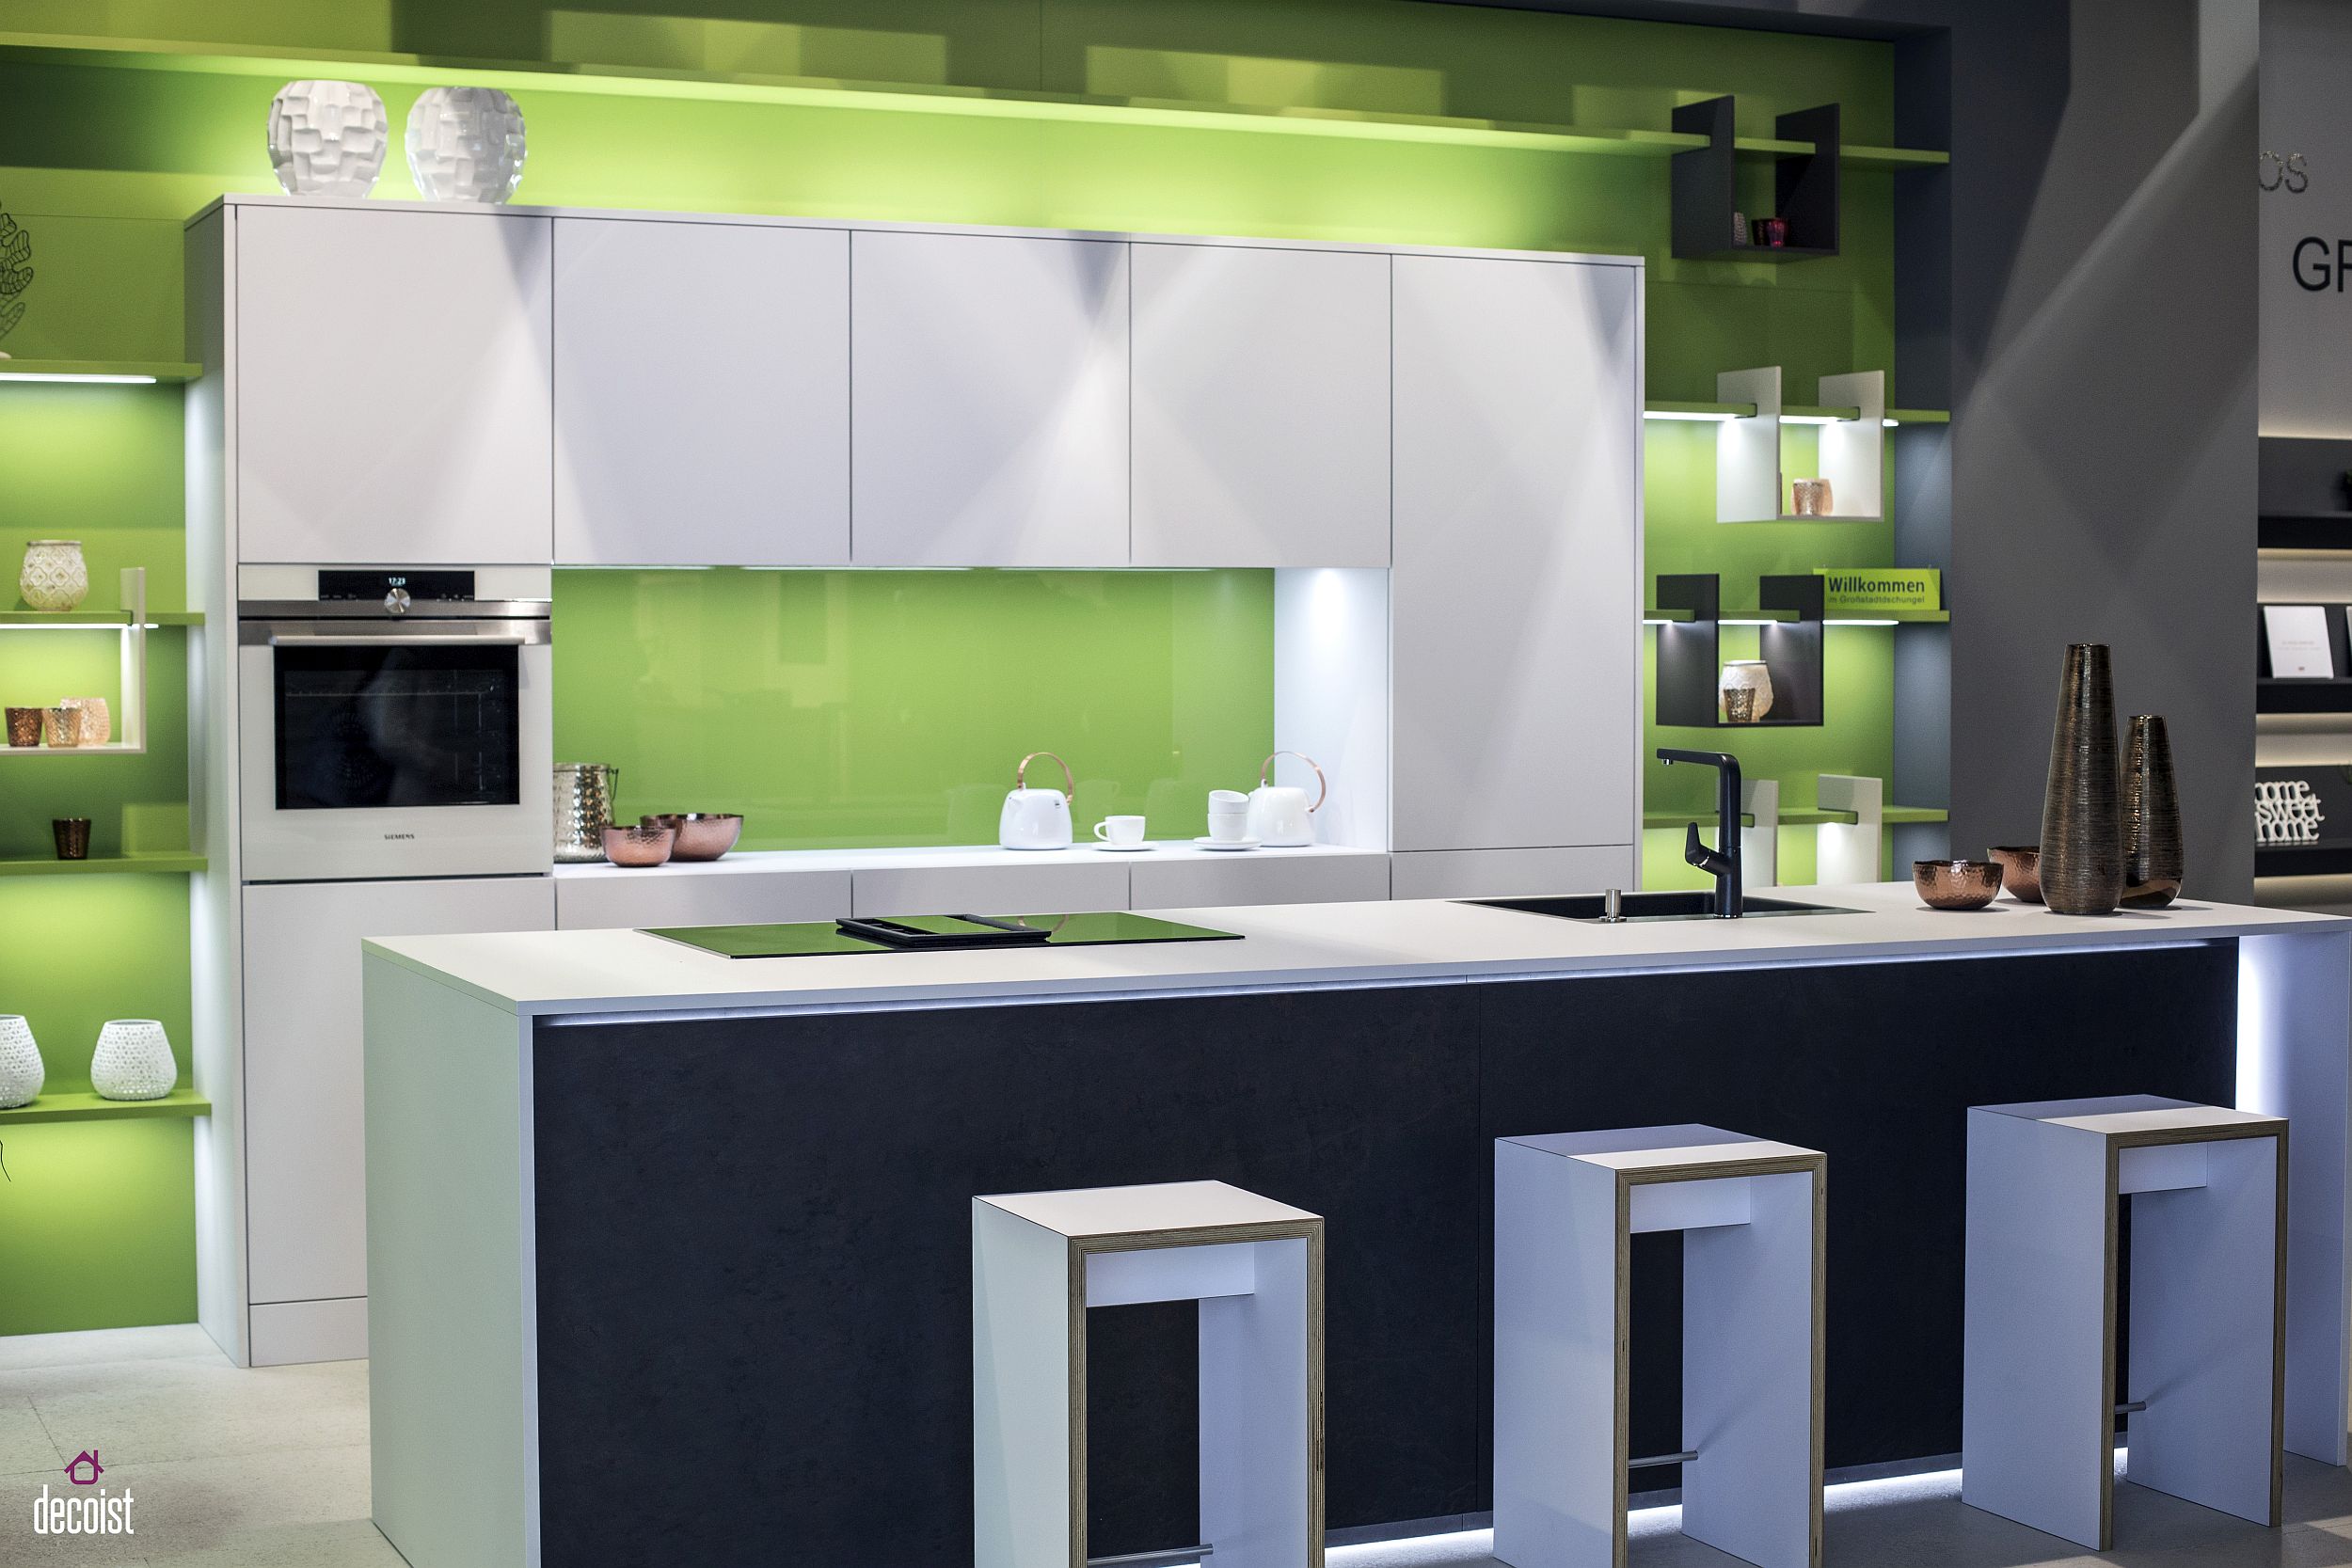 Modern-kitchen-in-lime-green-and-white-with-plenty-of-shelf-space